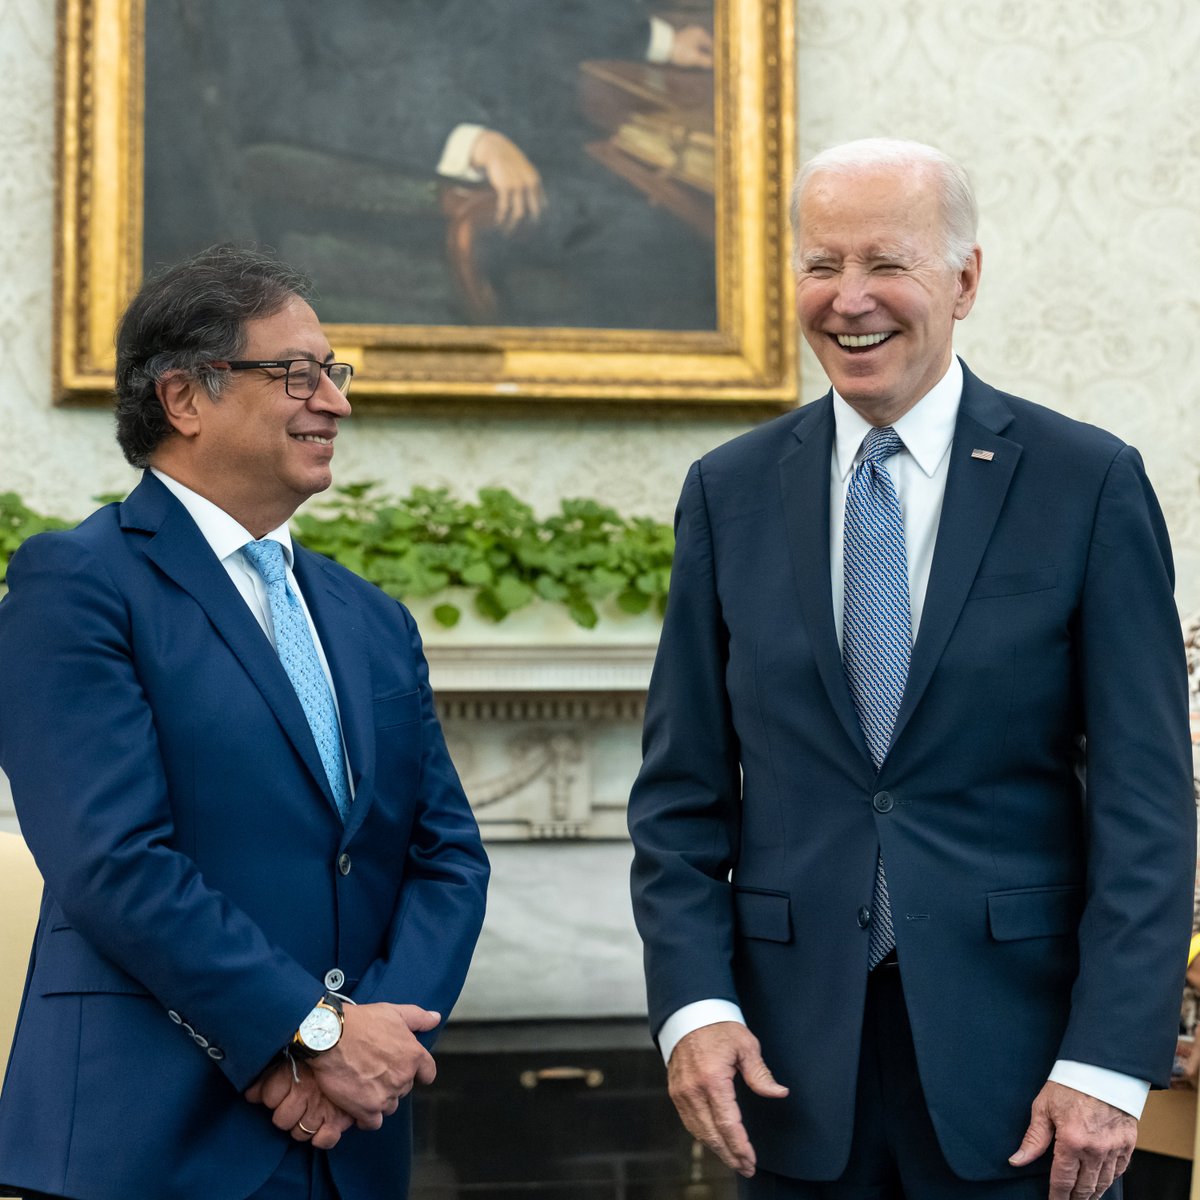 It was my pleasure to welcome President @petrogustavo to the White House. Colombia is the keystone of our shared efforts to build a more prosperous, equal, and democratic hemisphere.